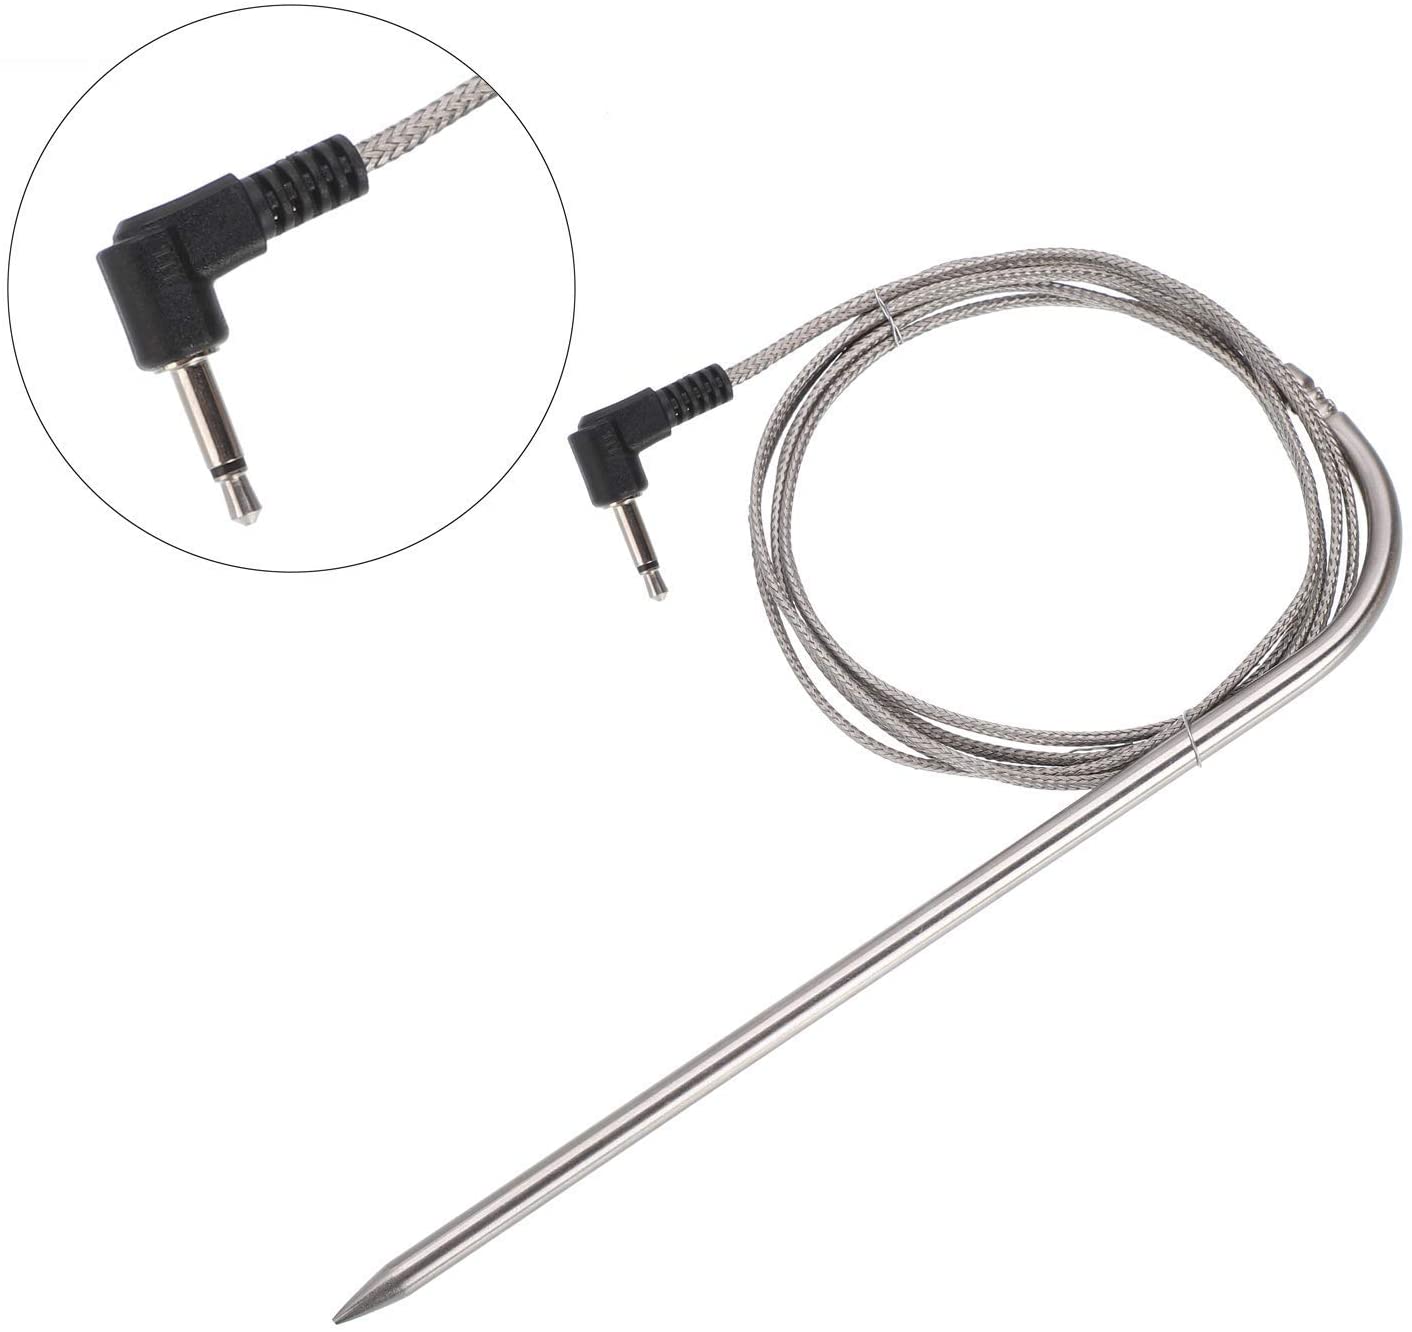 GrillPartsReplacement - Online BBQ Parts Retailer 3.5mm Plug Meat Probe for Pit Boss Sportsman Portable (PB206PSP2 ) Grills, Replacement High Temperature BBQ Digital Thermostat Meat Probes